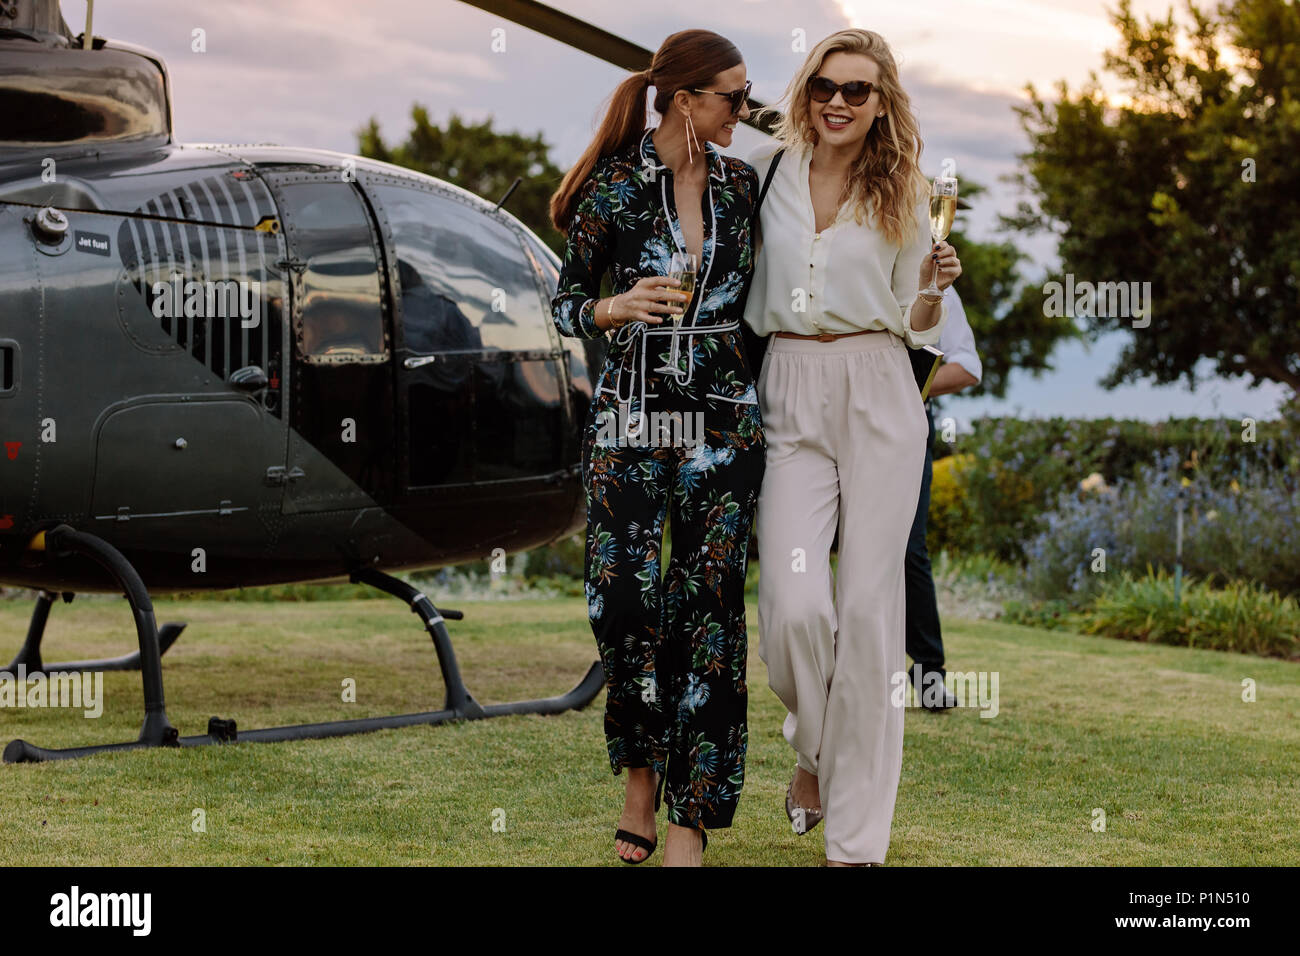 Two young women walking away from a helicopter with a glass of wine in their hands. Best friends walking together with wine and having fun. Stock Photo